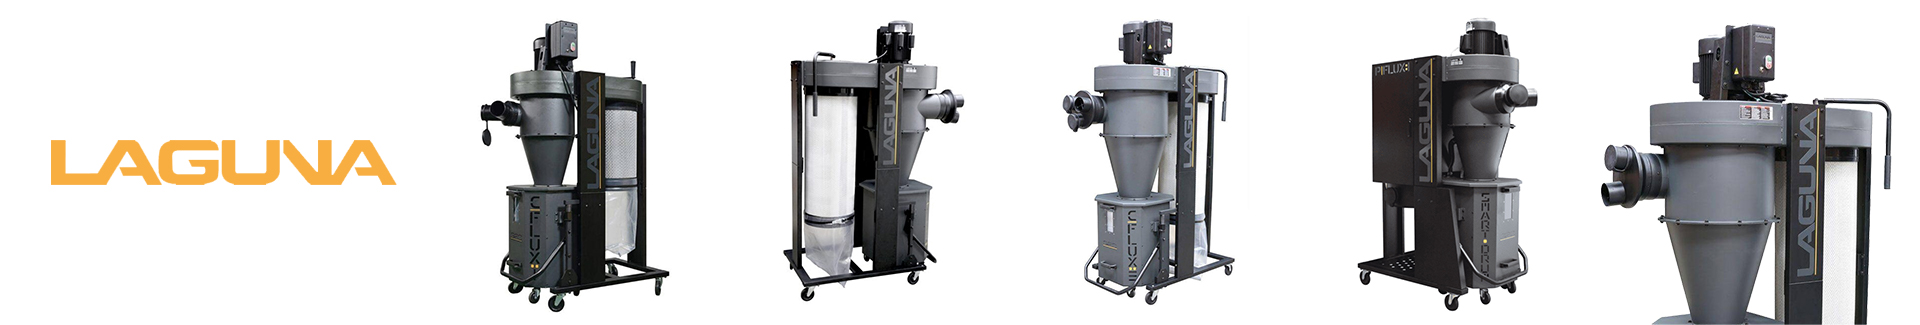 Laguna Classic Dust Collectors | Typhoon Dust Collection Solutions